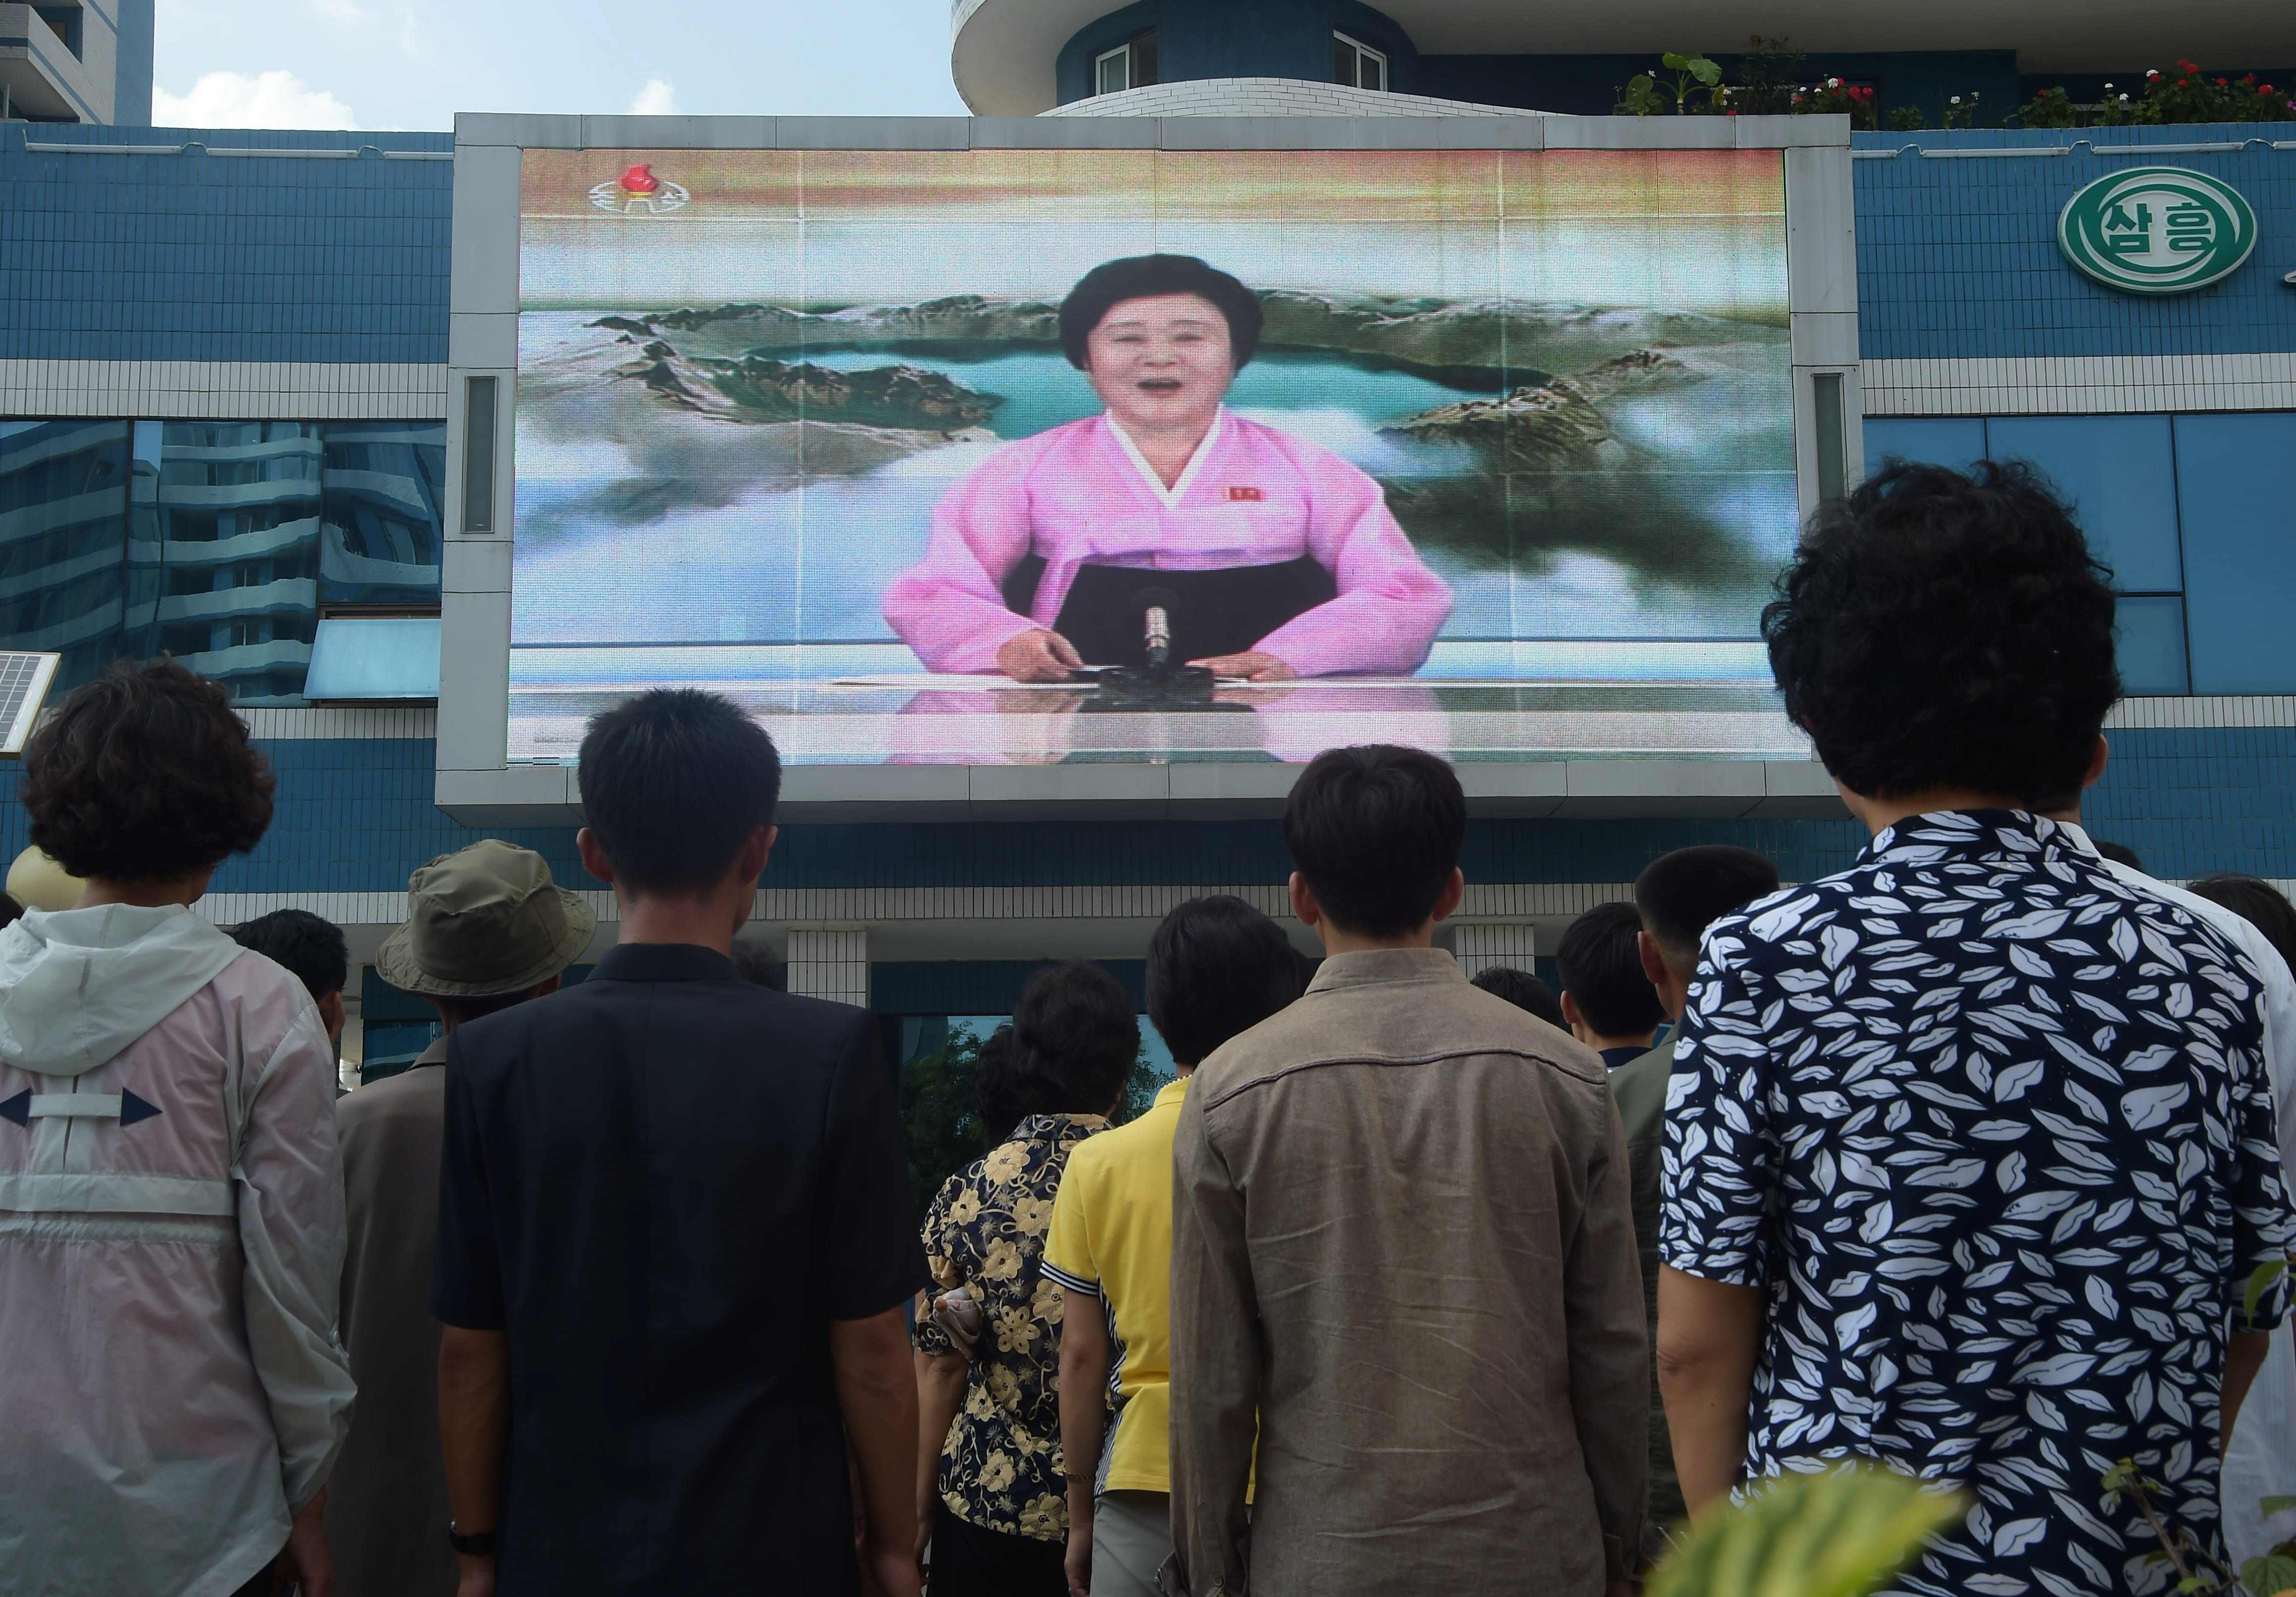 Pyongyang residents watch news of their country’s sixth nuclear test on September 3, from a video screen installed on Mirae Scientists Street in Pyongyang. There are more than a few people, including in South Korea, who may loathe the Kim family regime but admire Pyongyang’s refusal to give in to US pressure to abandon its missile and nuclear programme. Photo: AFP